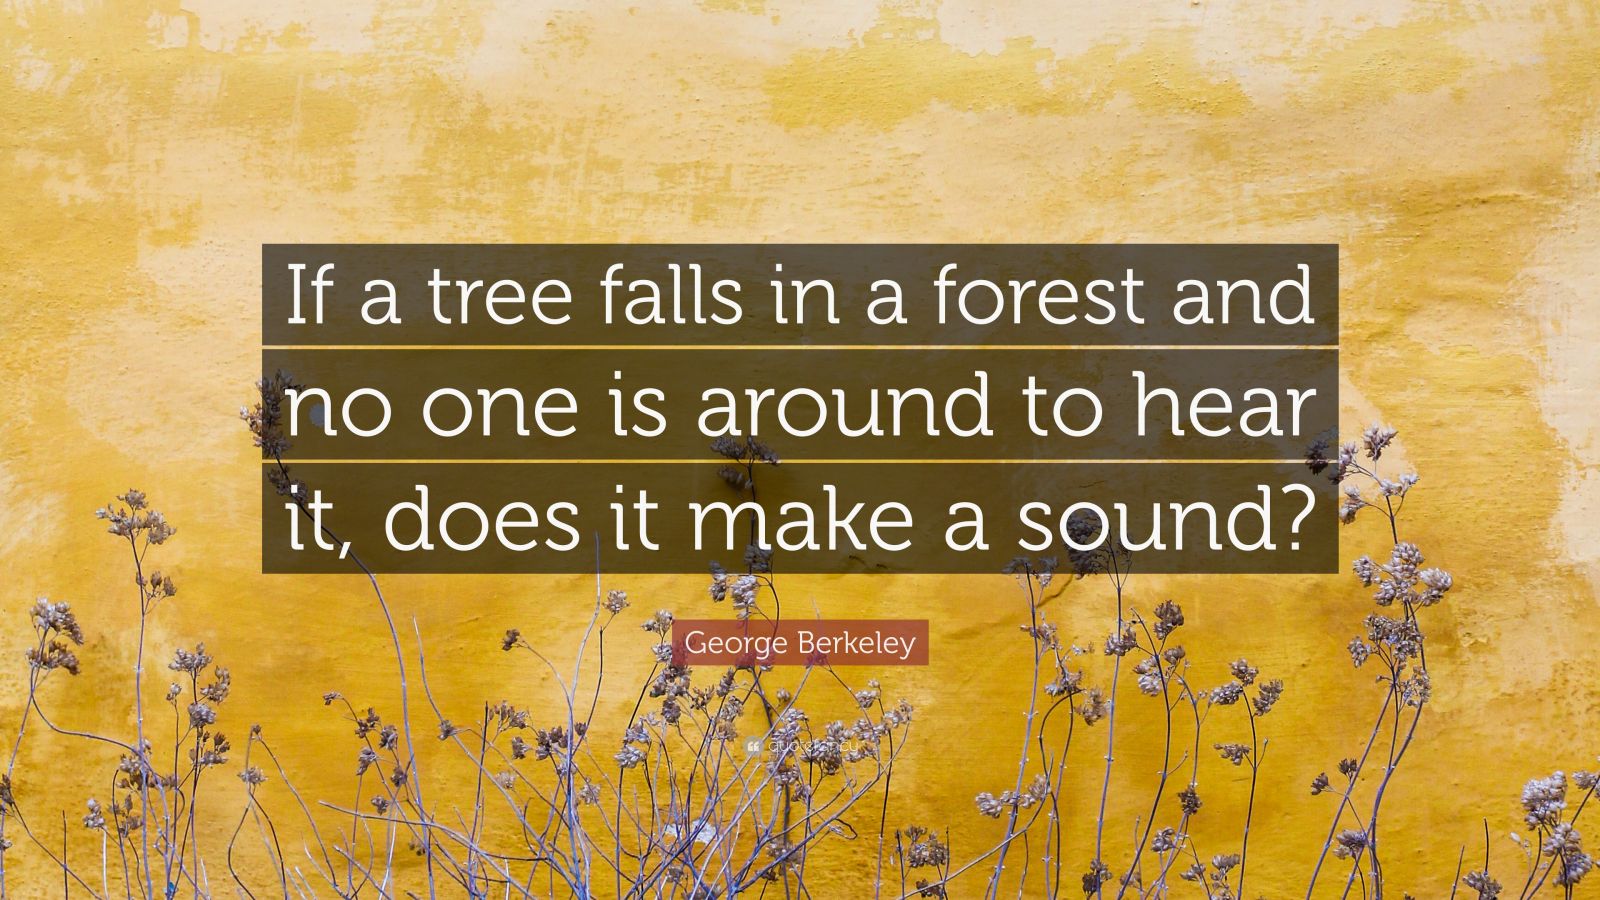 George Berkeley Quote “If a tree falls in a forest and no one is